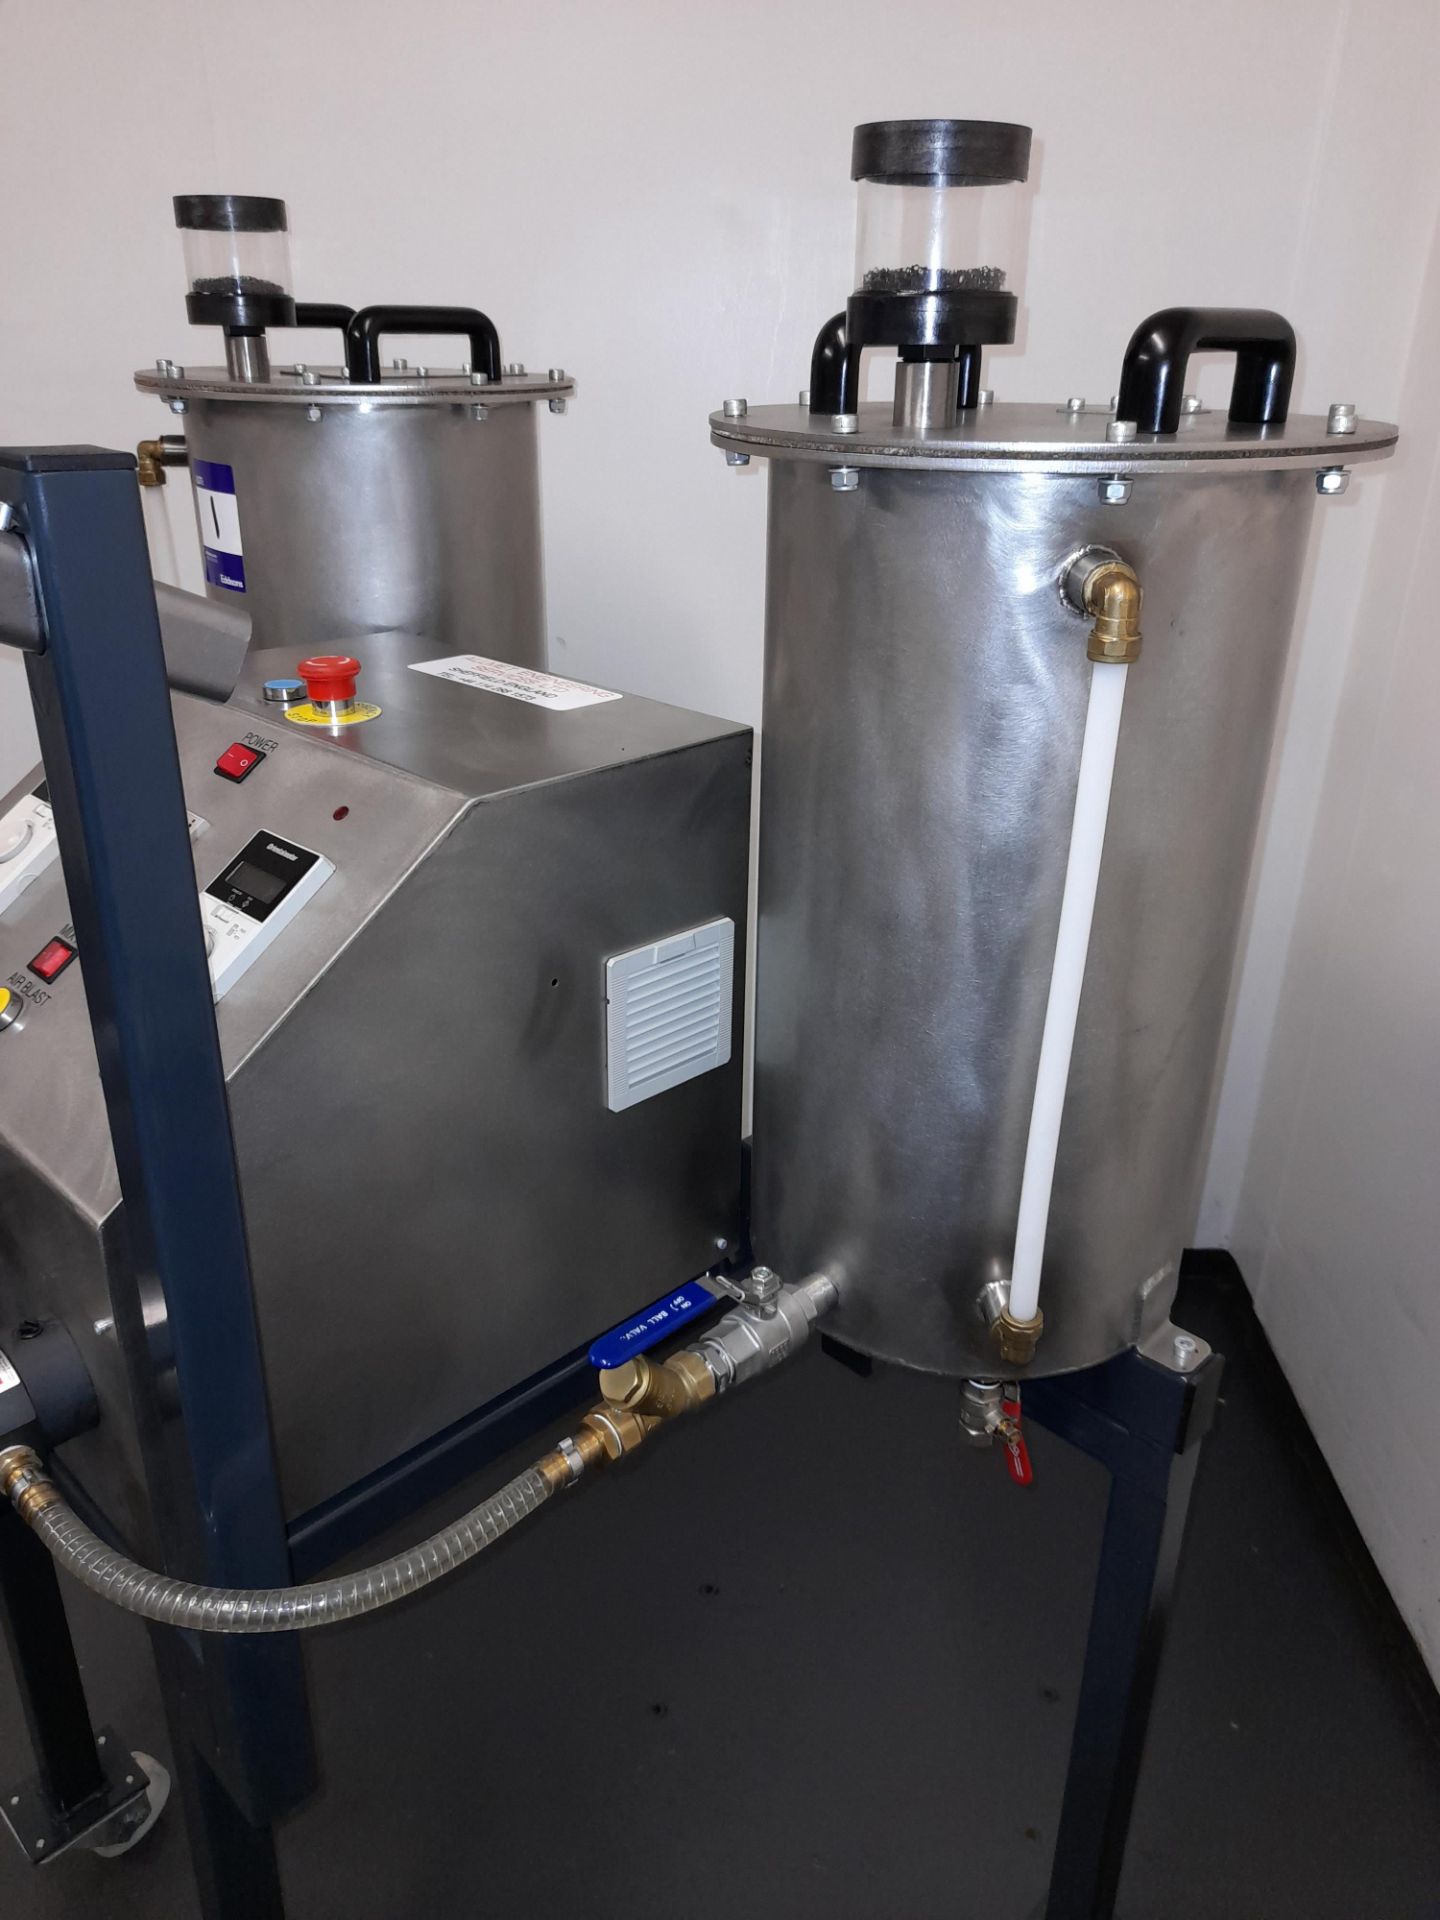 Twin tank mixing system with spray gun, 20L capacity tanks, two chemical metering system, with - Image 6 of 8